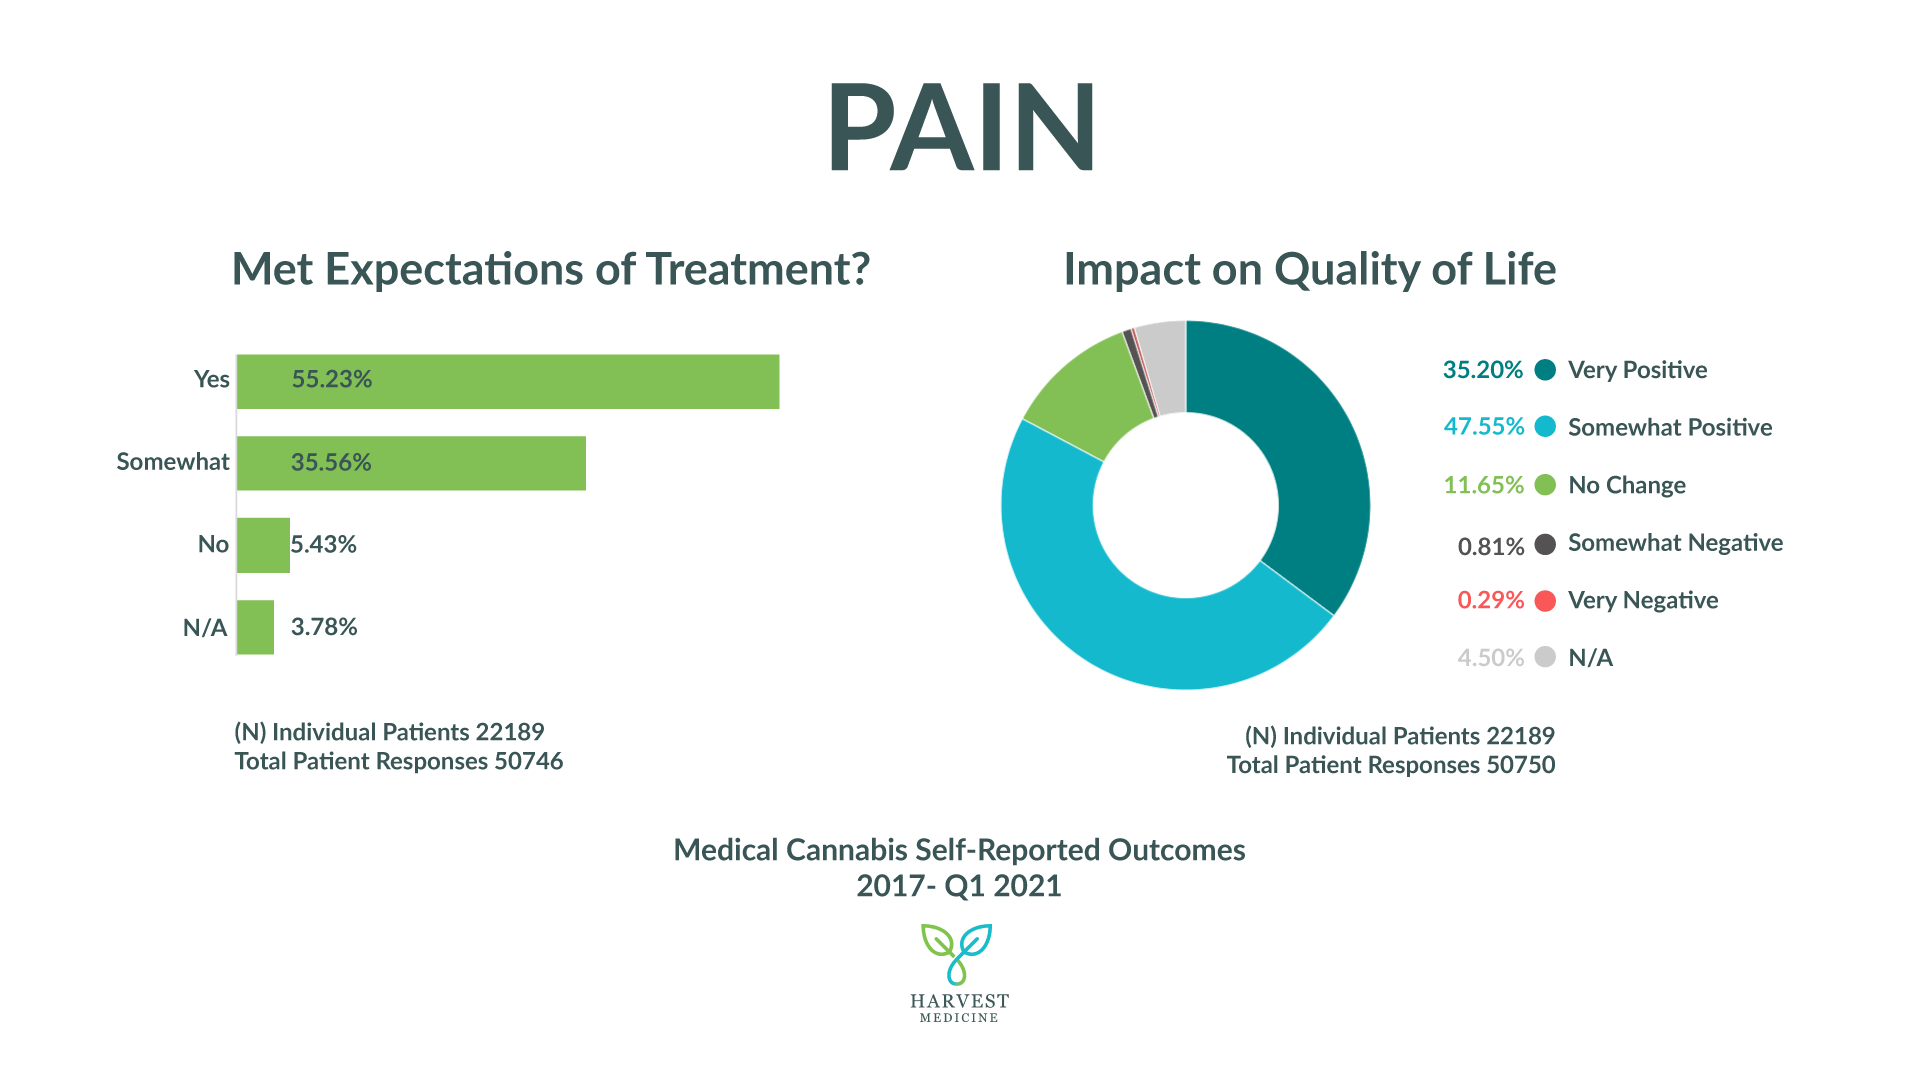 arvest Medicine's patient self-reported outcomes for pain from 2017-2021. Sample size 22189